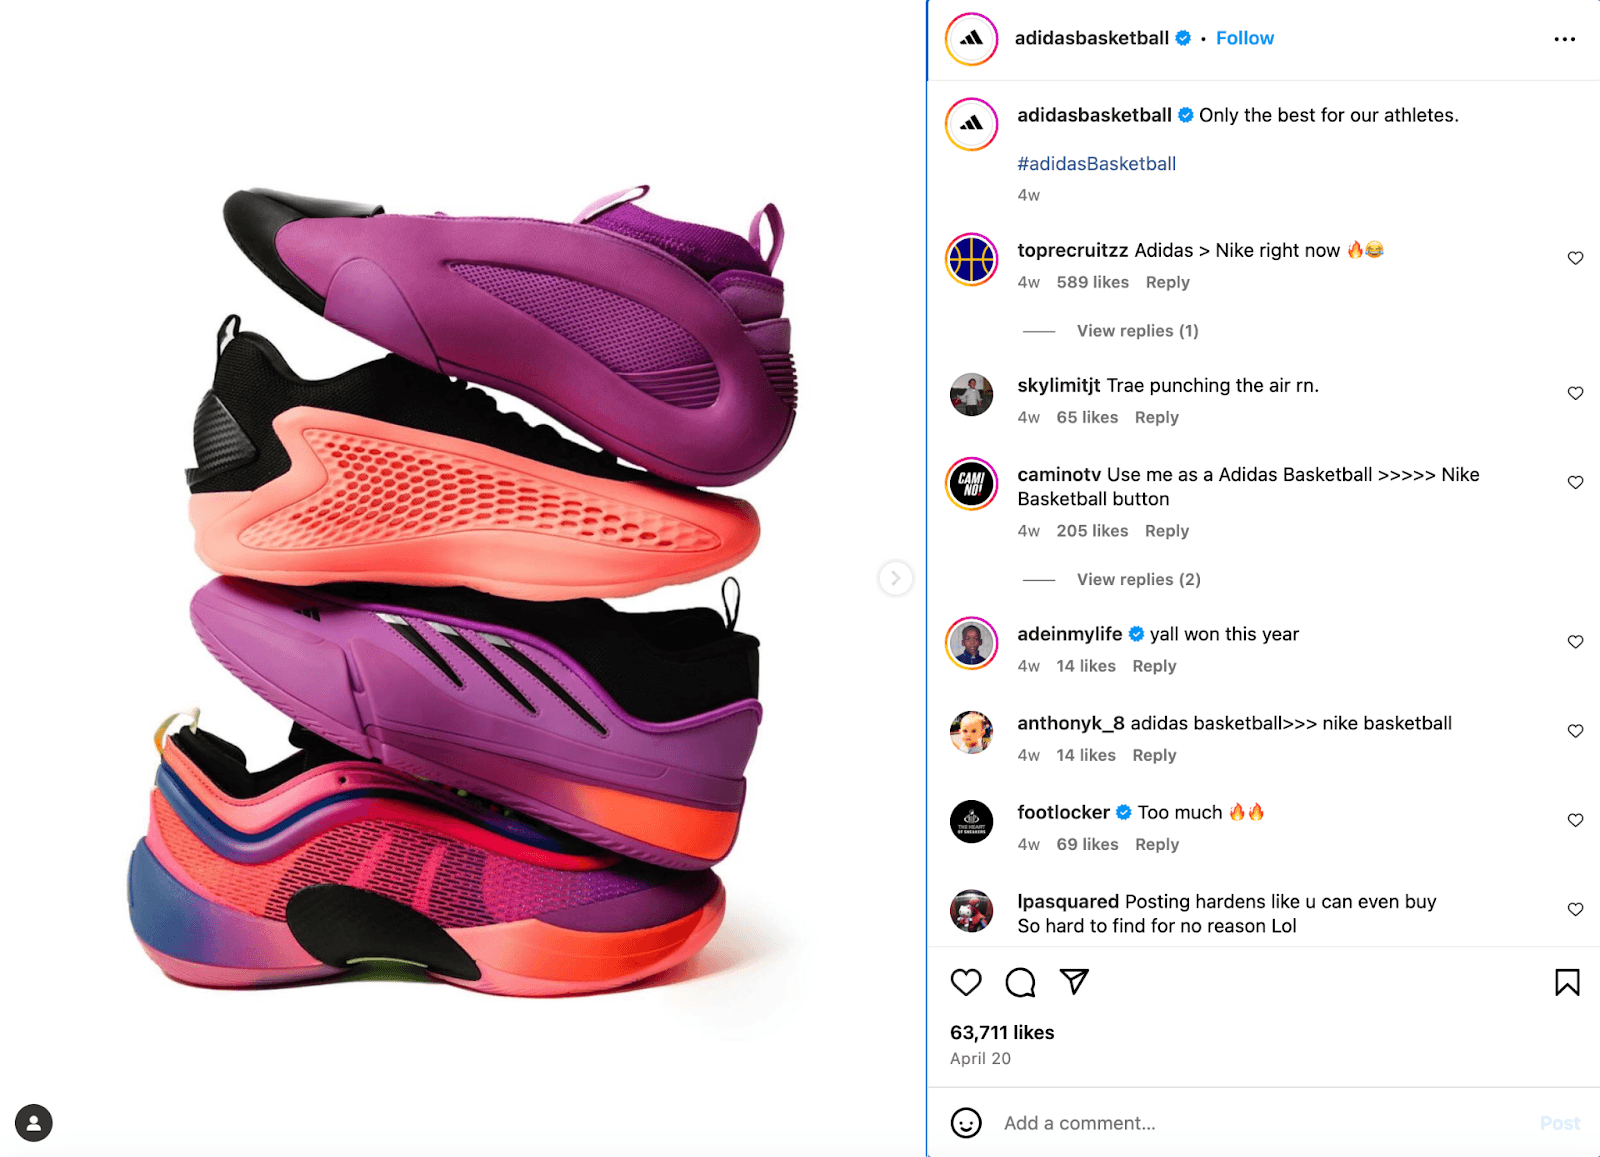 Marketing strategy example from Adidas, who markets their newest shoes on Instagram